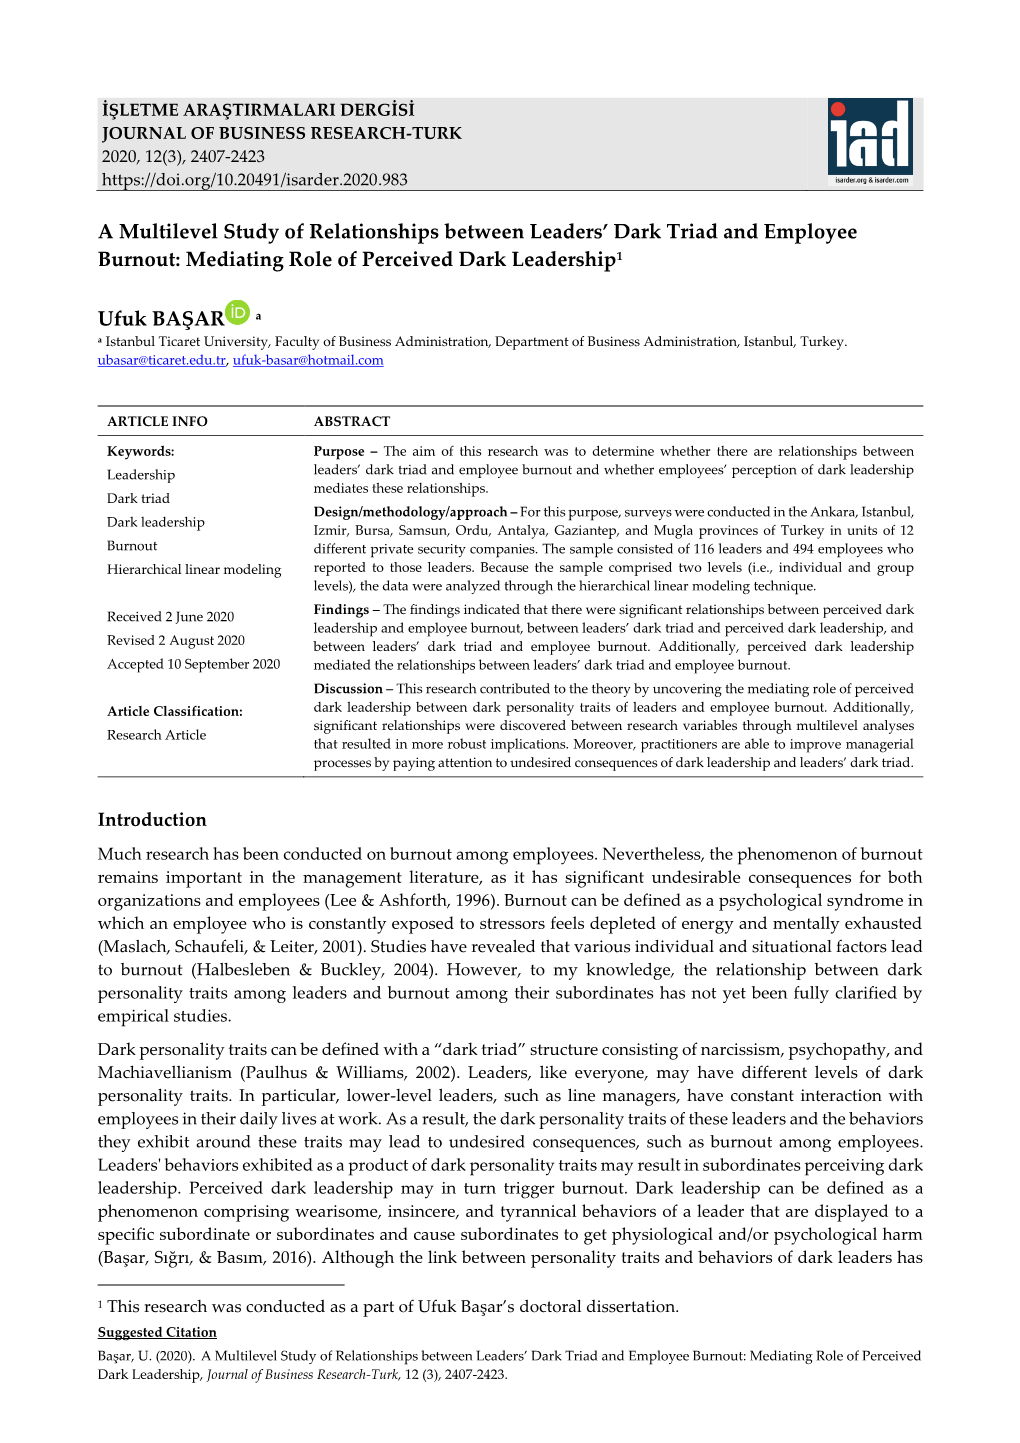 A Multilevel Study of Relationships Between Leaders’ Dark Triad and Employee Burnout: Mediating Role of Perceived Dark Leadership1